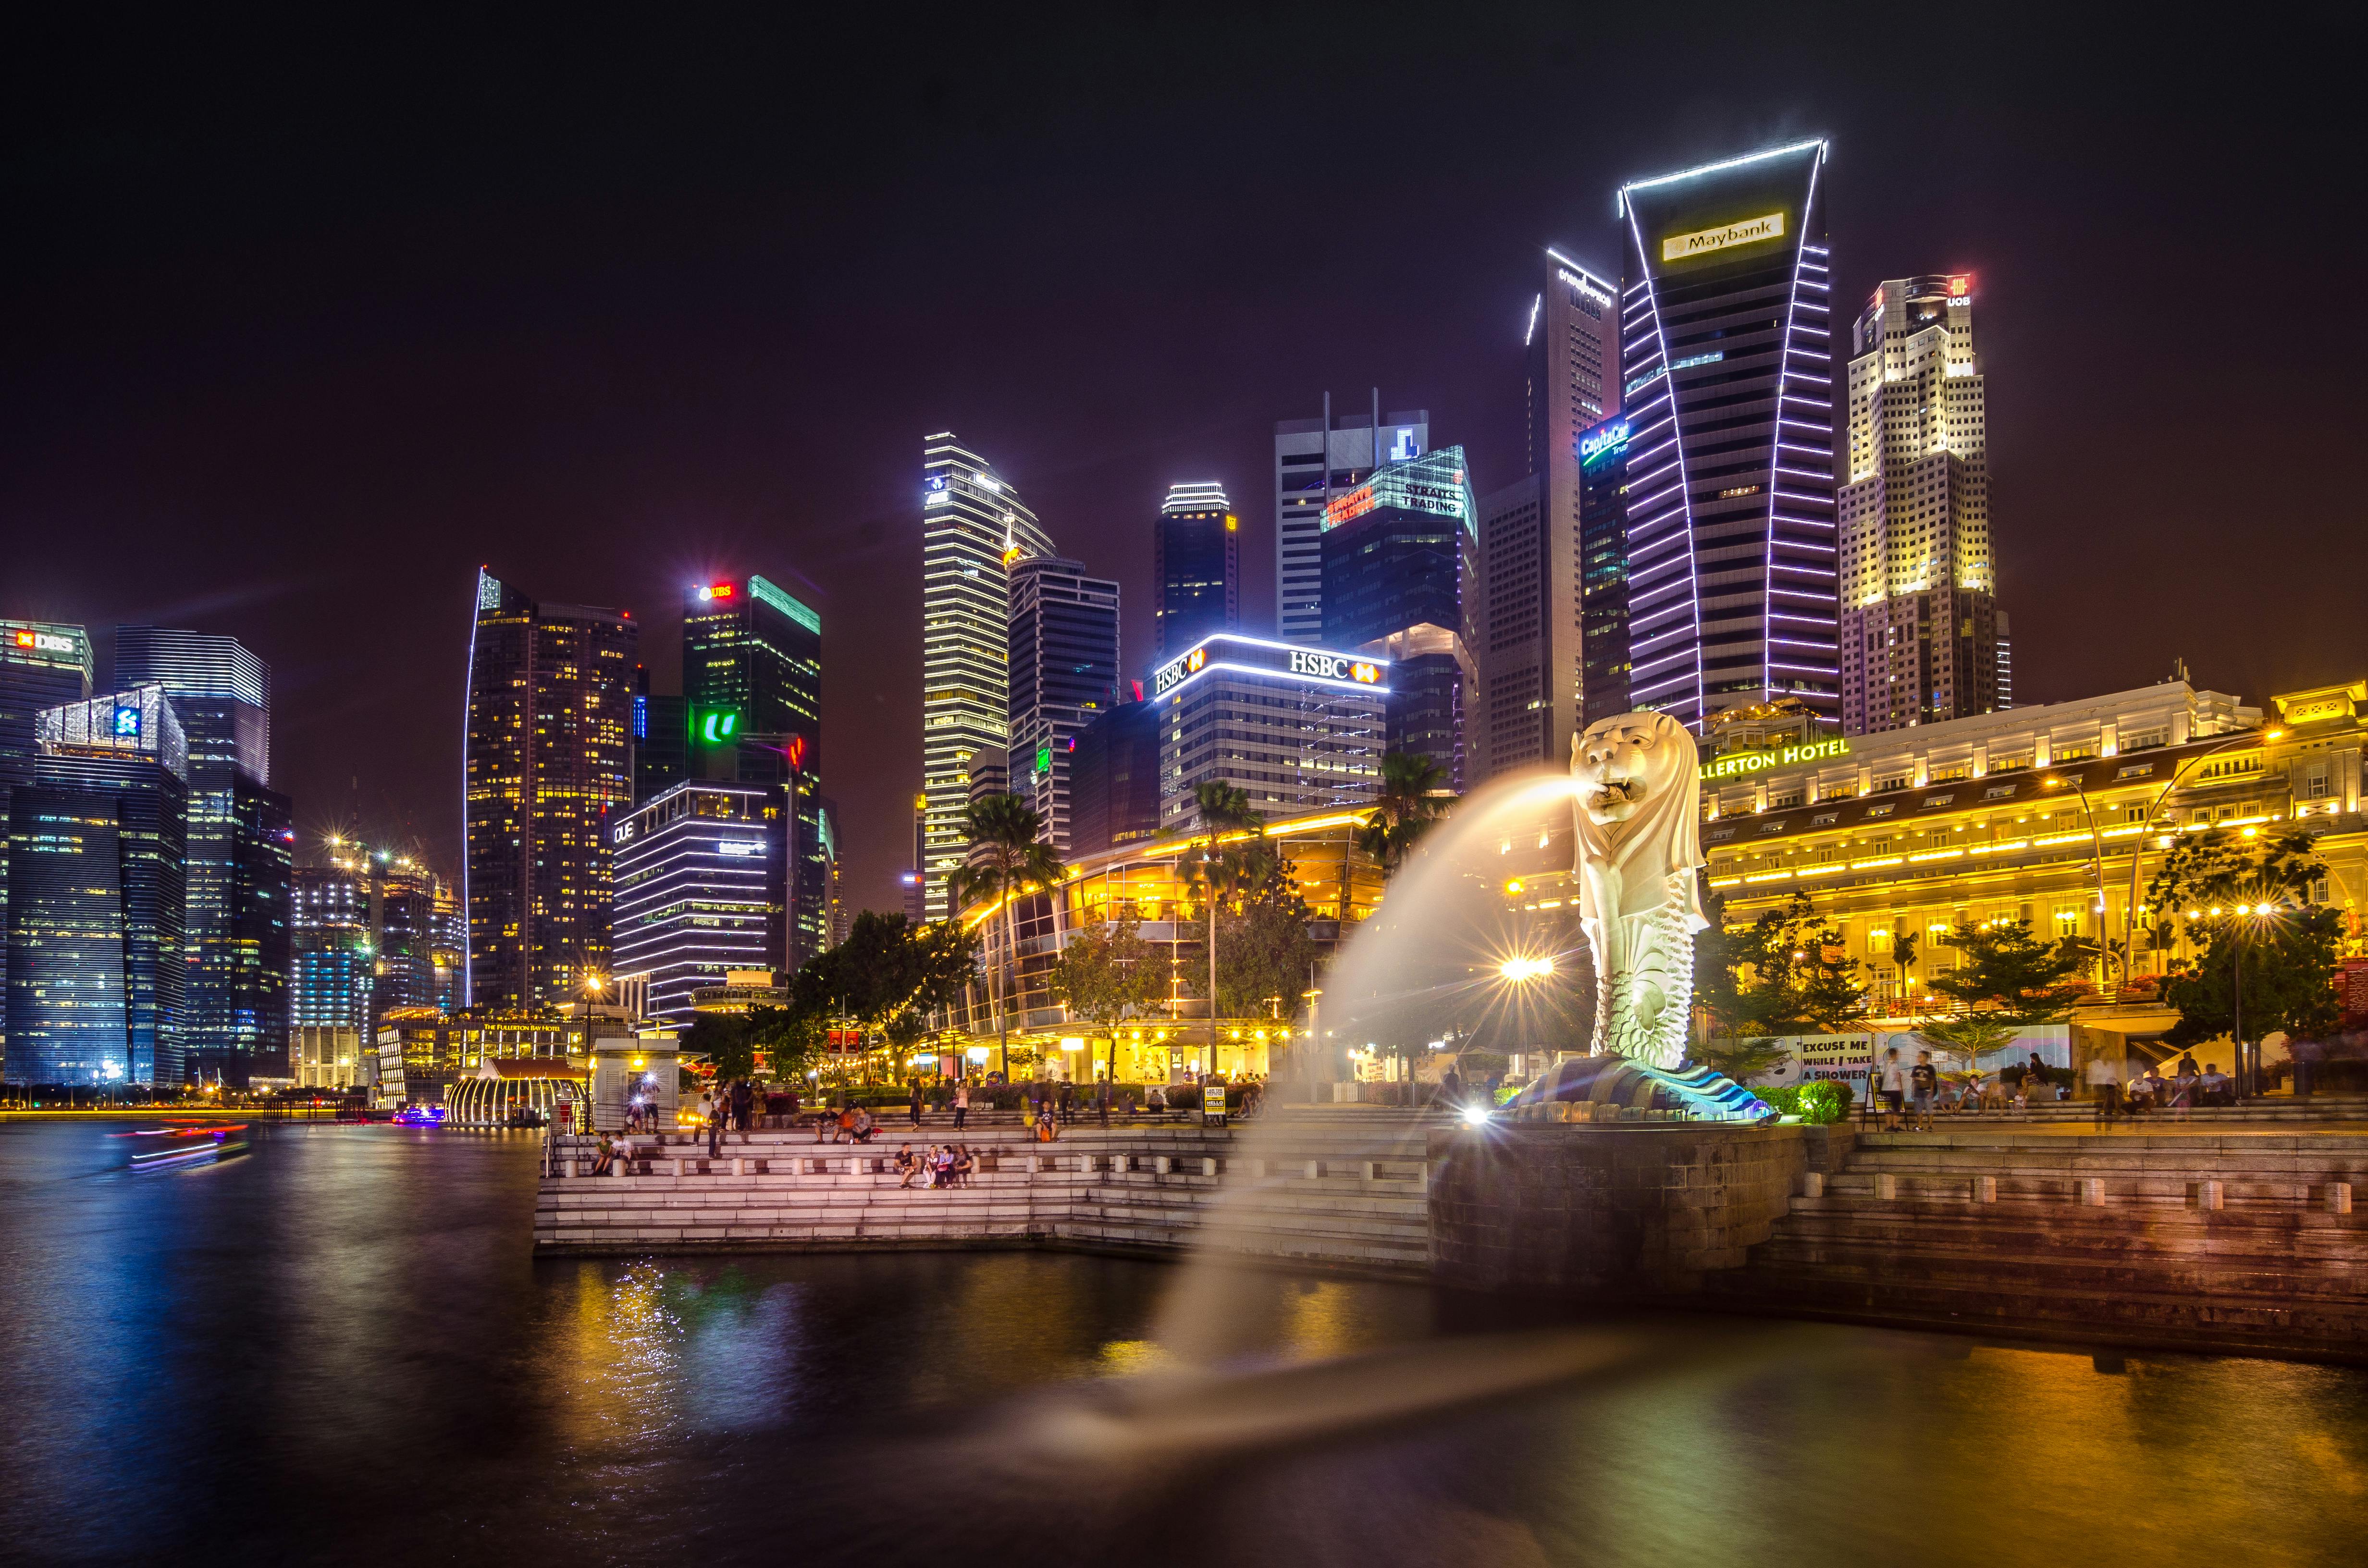 Singapore is one of the most prosperous countries in the world